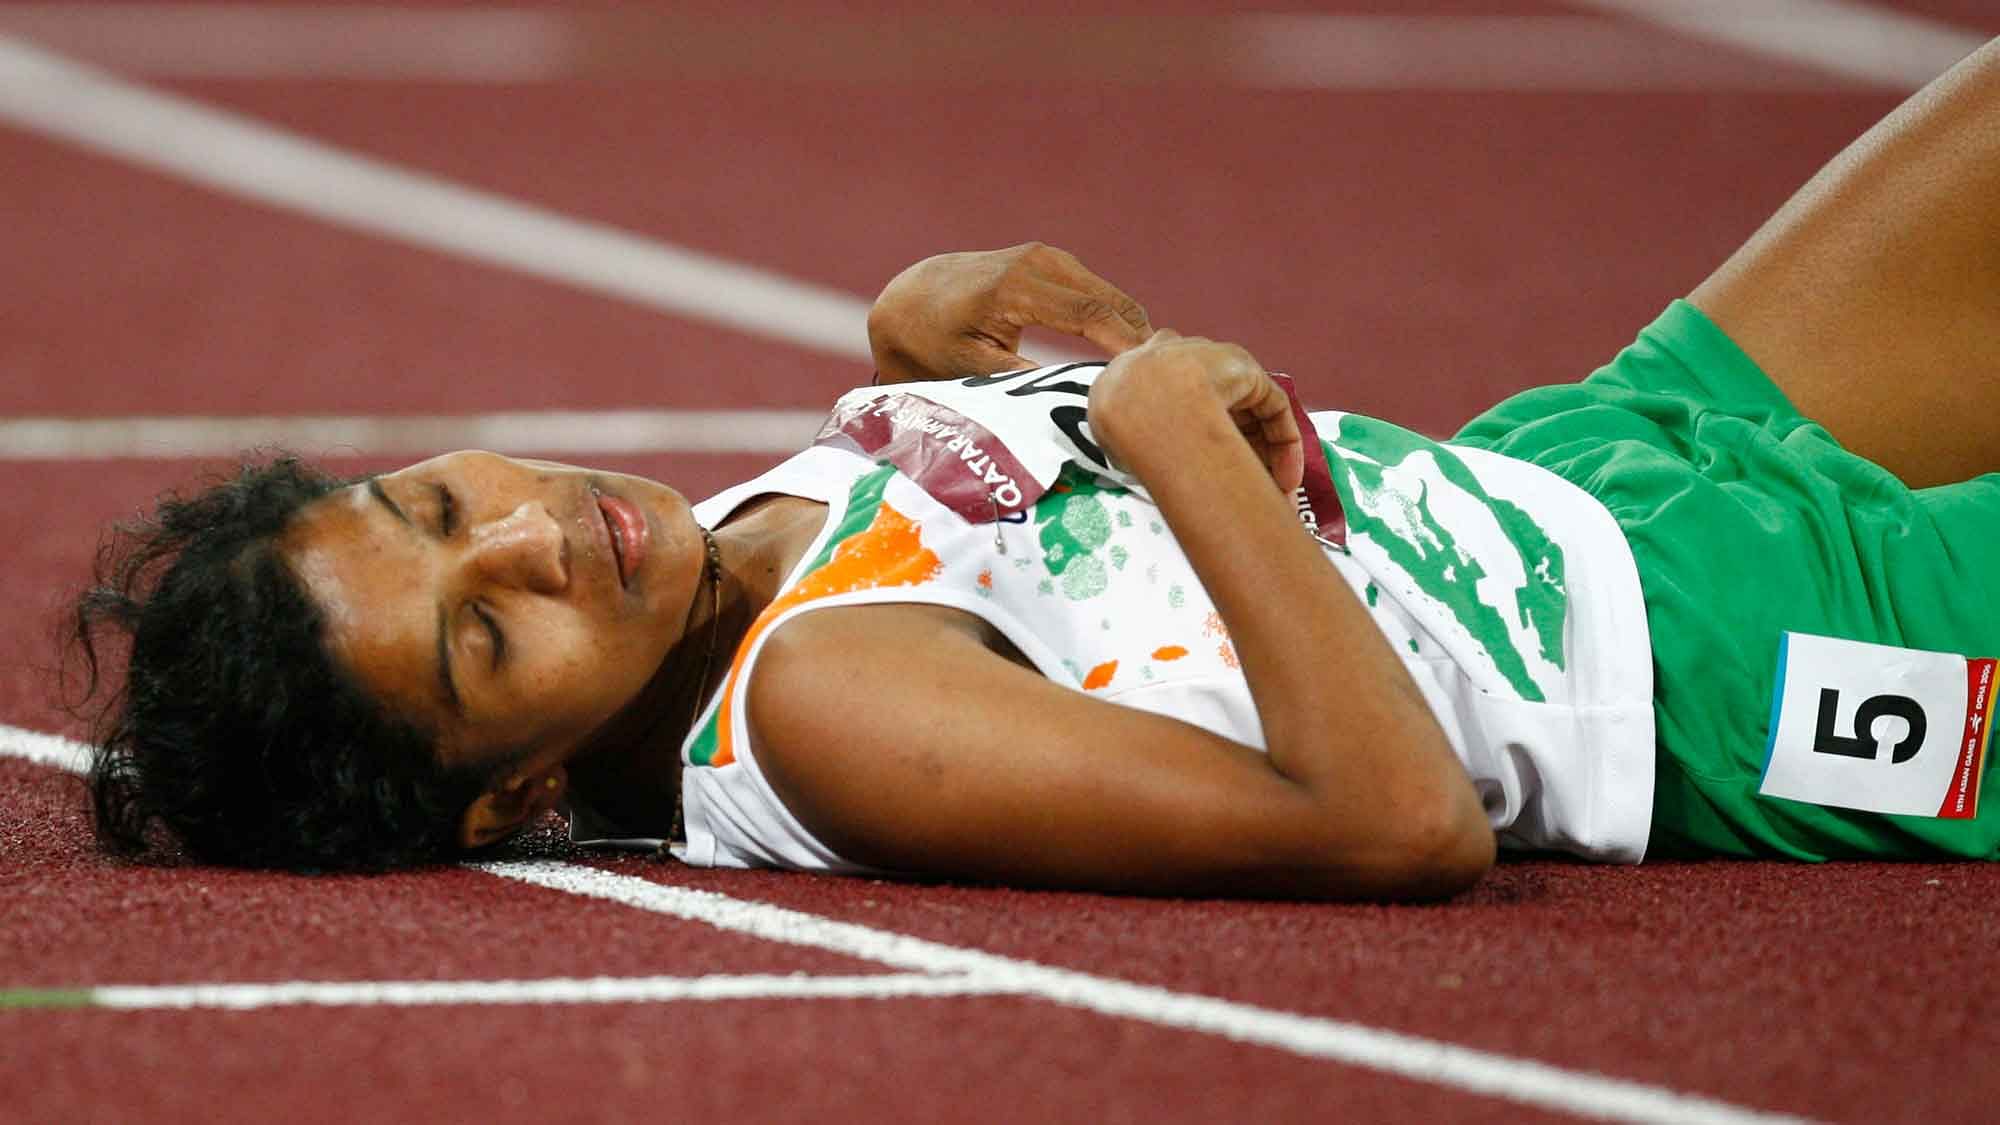 OP Jaisha on the track after the women’s 5000m final at the 15th Asian Games in Doha on 11 December 2006. (Photo: Reuters)